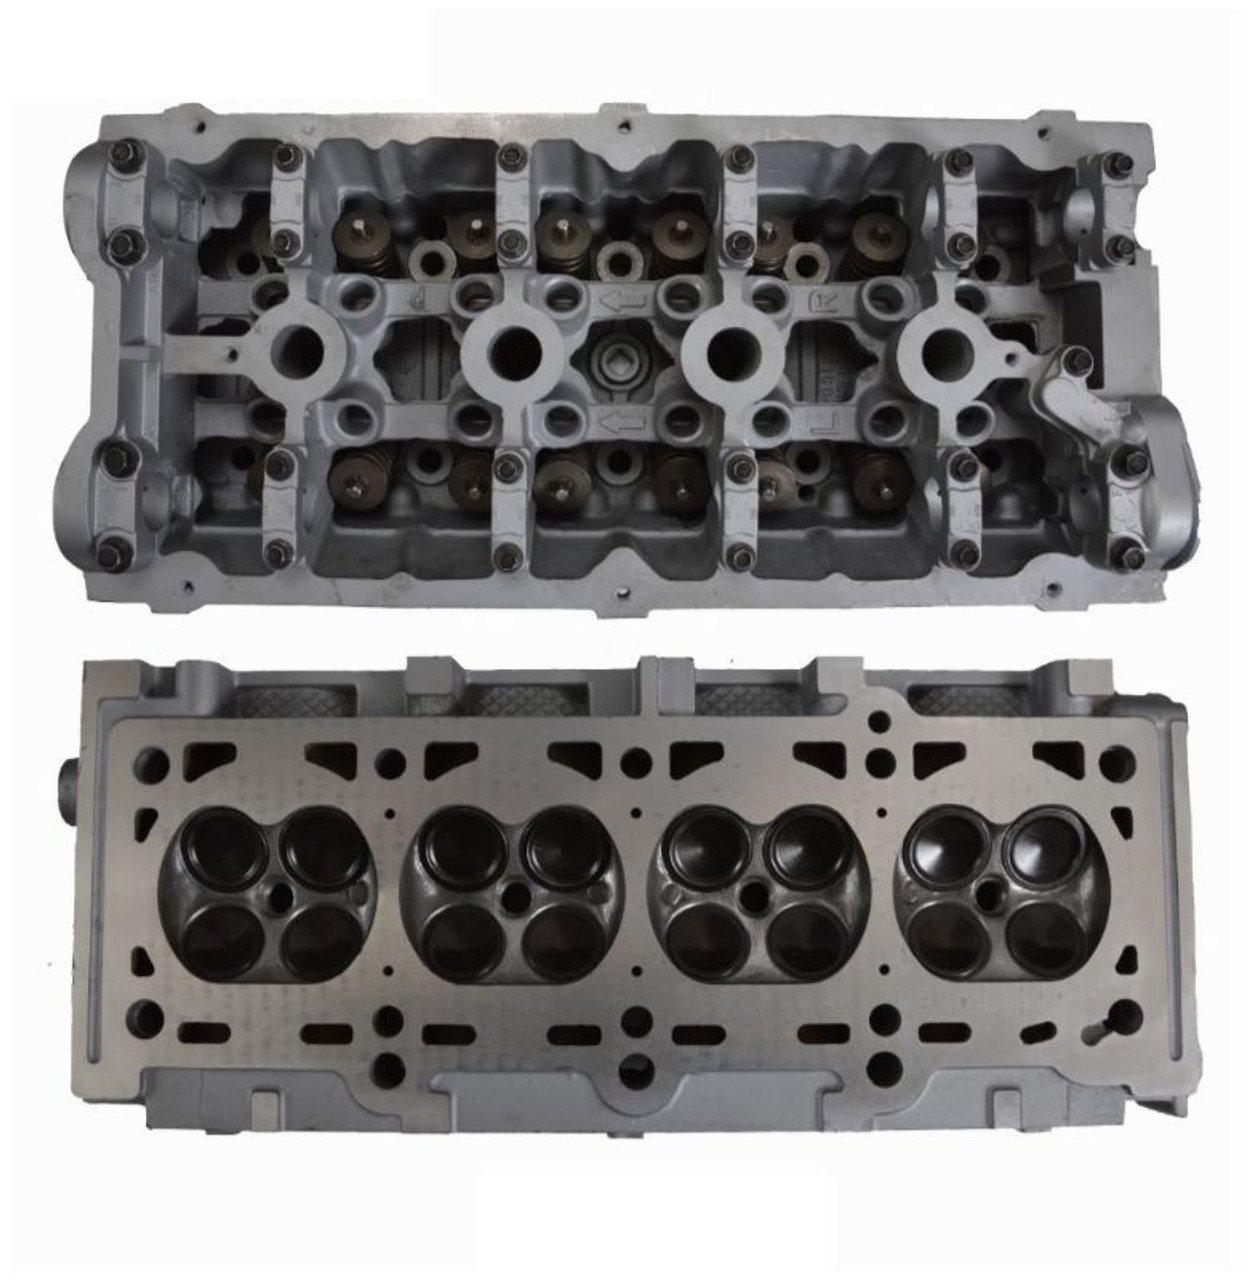 Cylinder Head Assembly - 1997 Plymouth Grand Voyager 2.4L (CH1073R.B16)